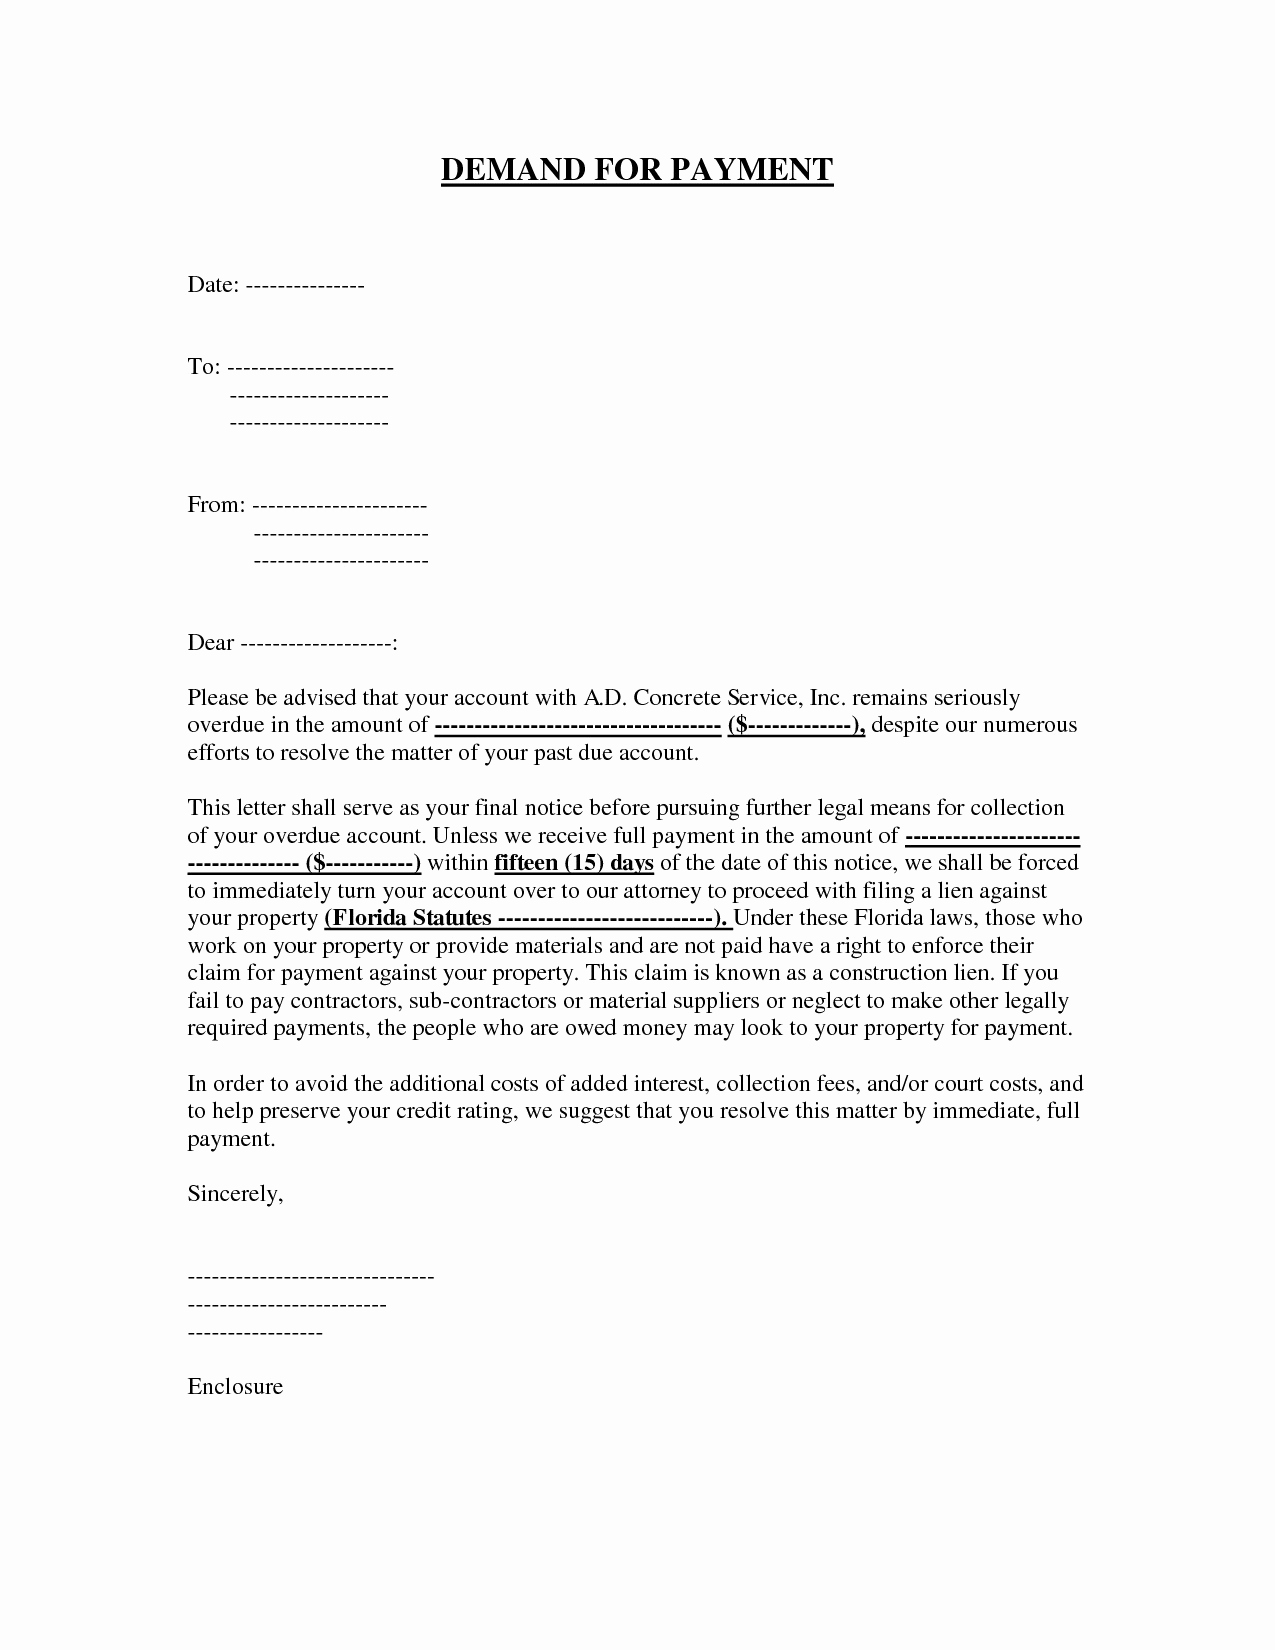 Demand Letter for Payment Fresh Demand Letter Template for Money Owed Samples